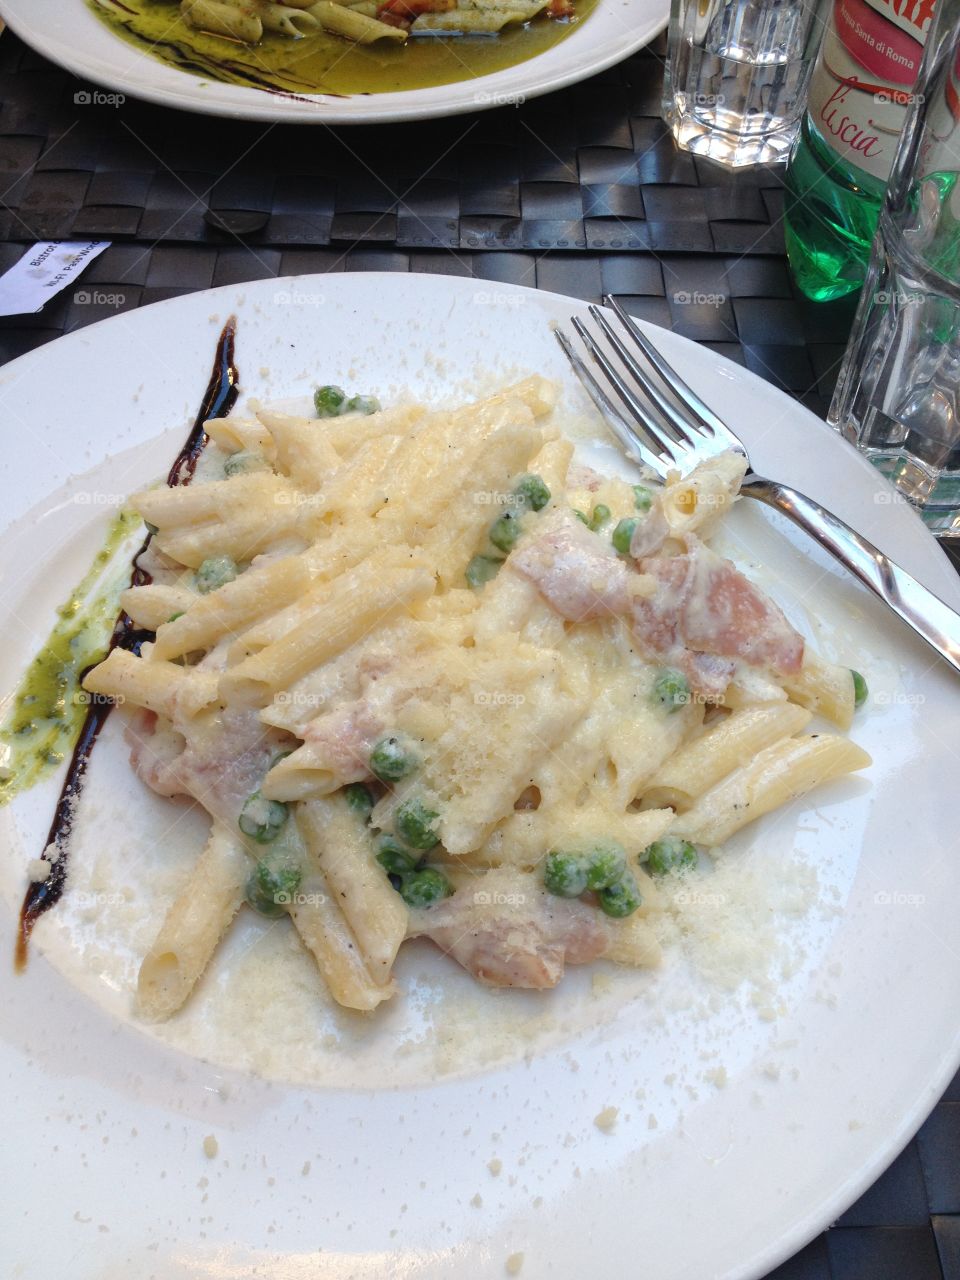 Penne pasta in cream sauce . Penne pasta in cream sauce from Italy